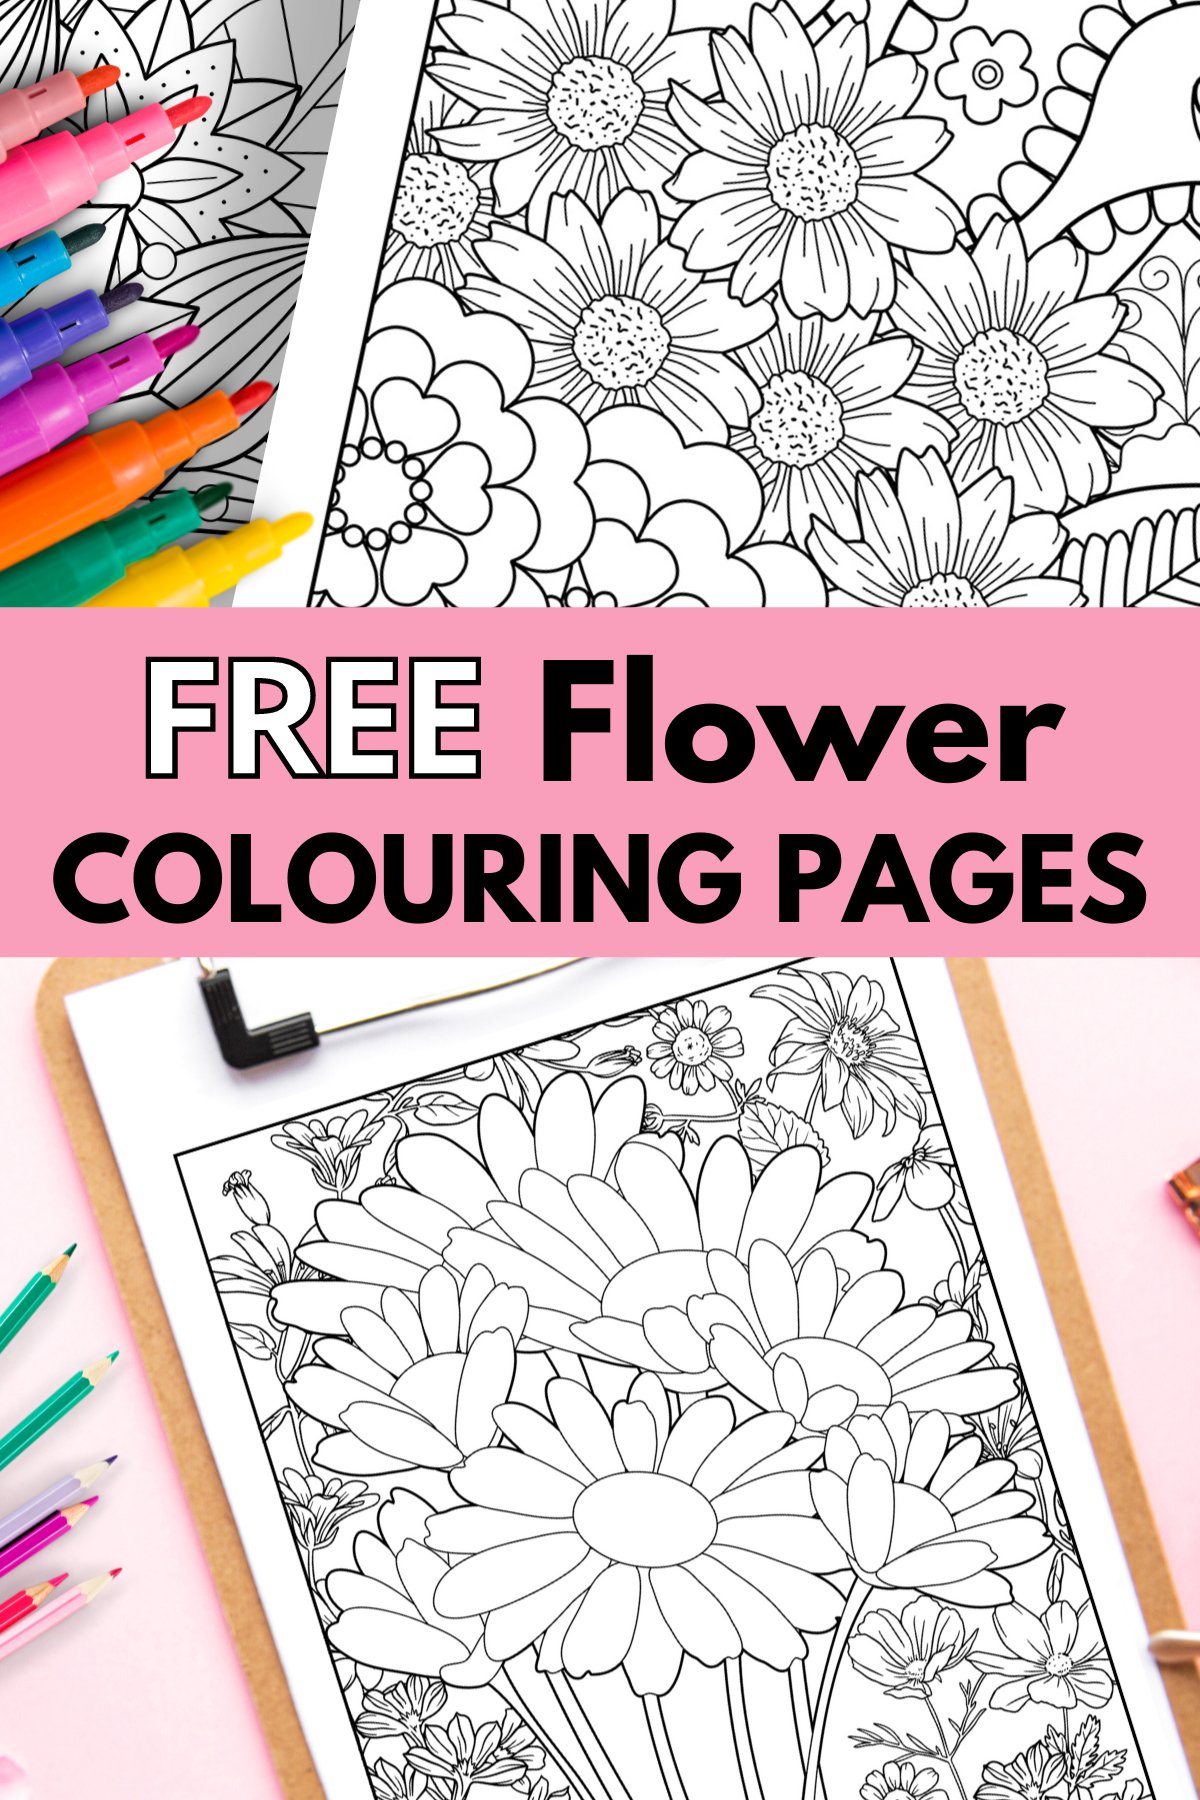 Free flower colouring pages â gathering beauty